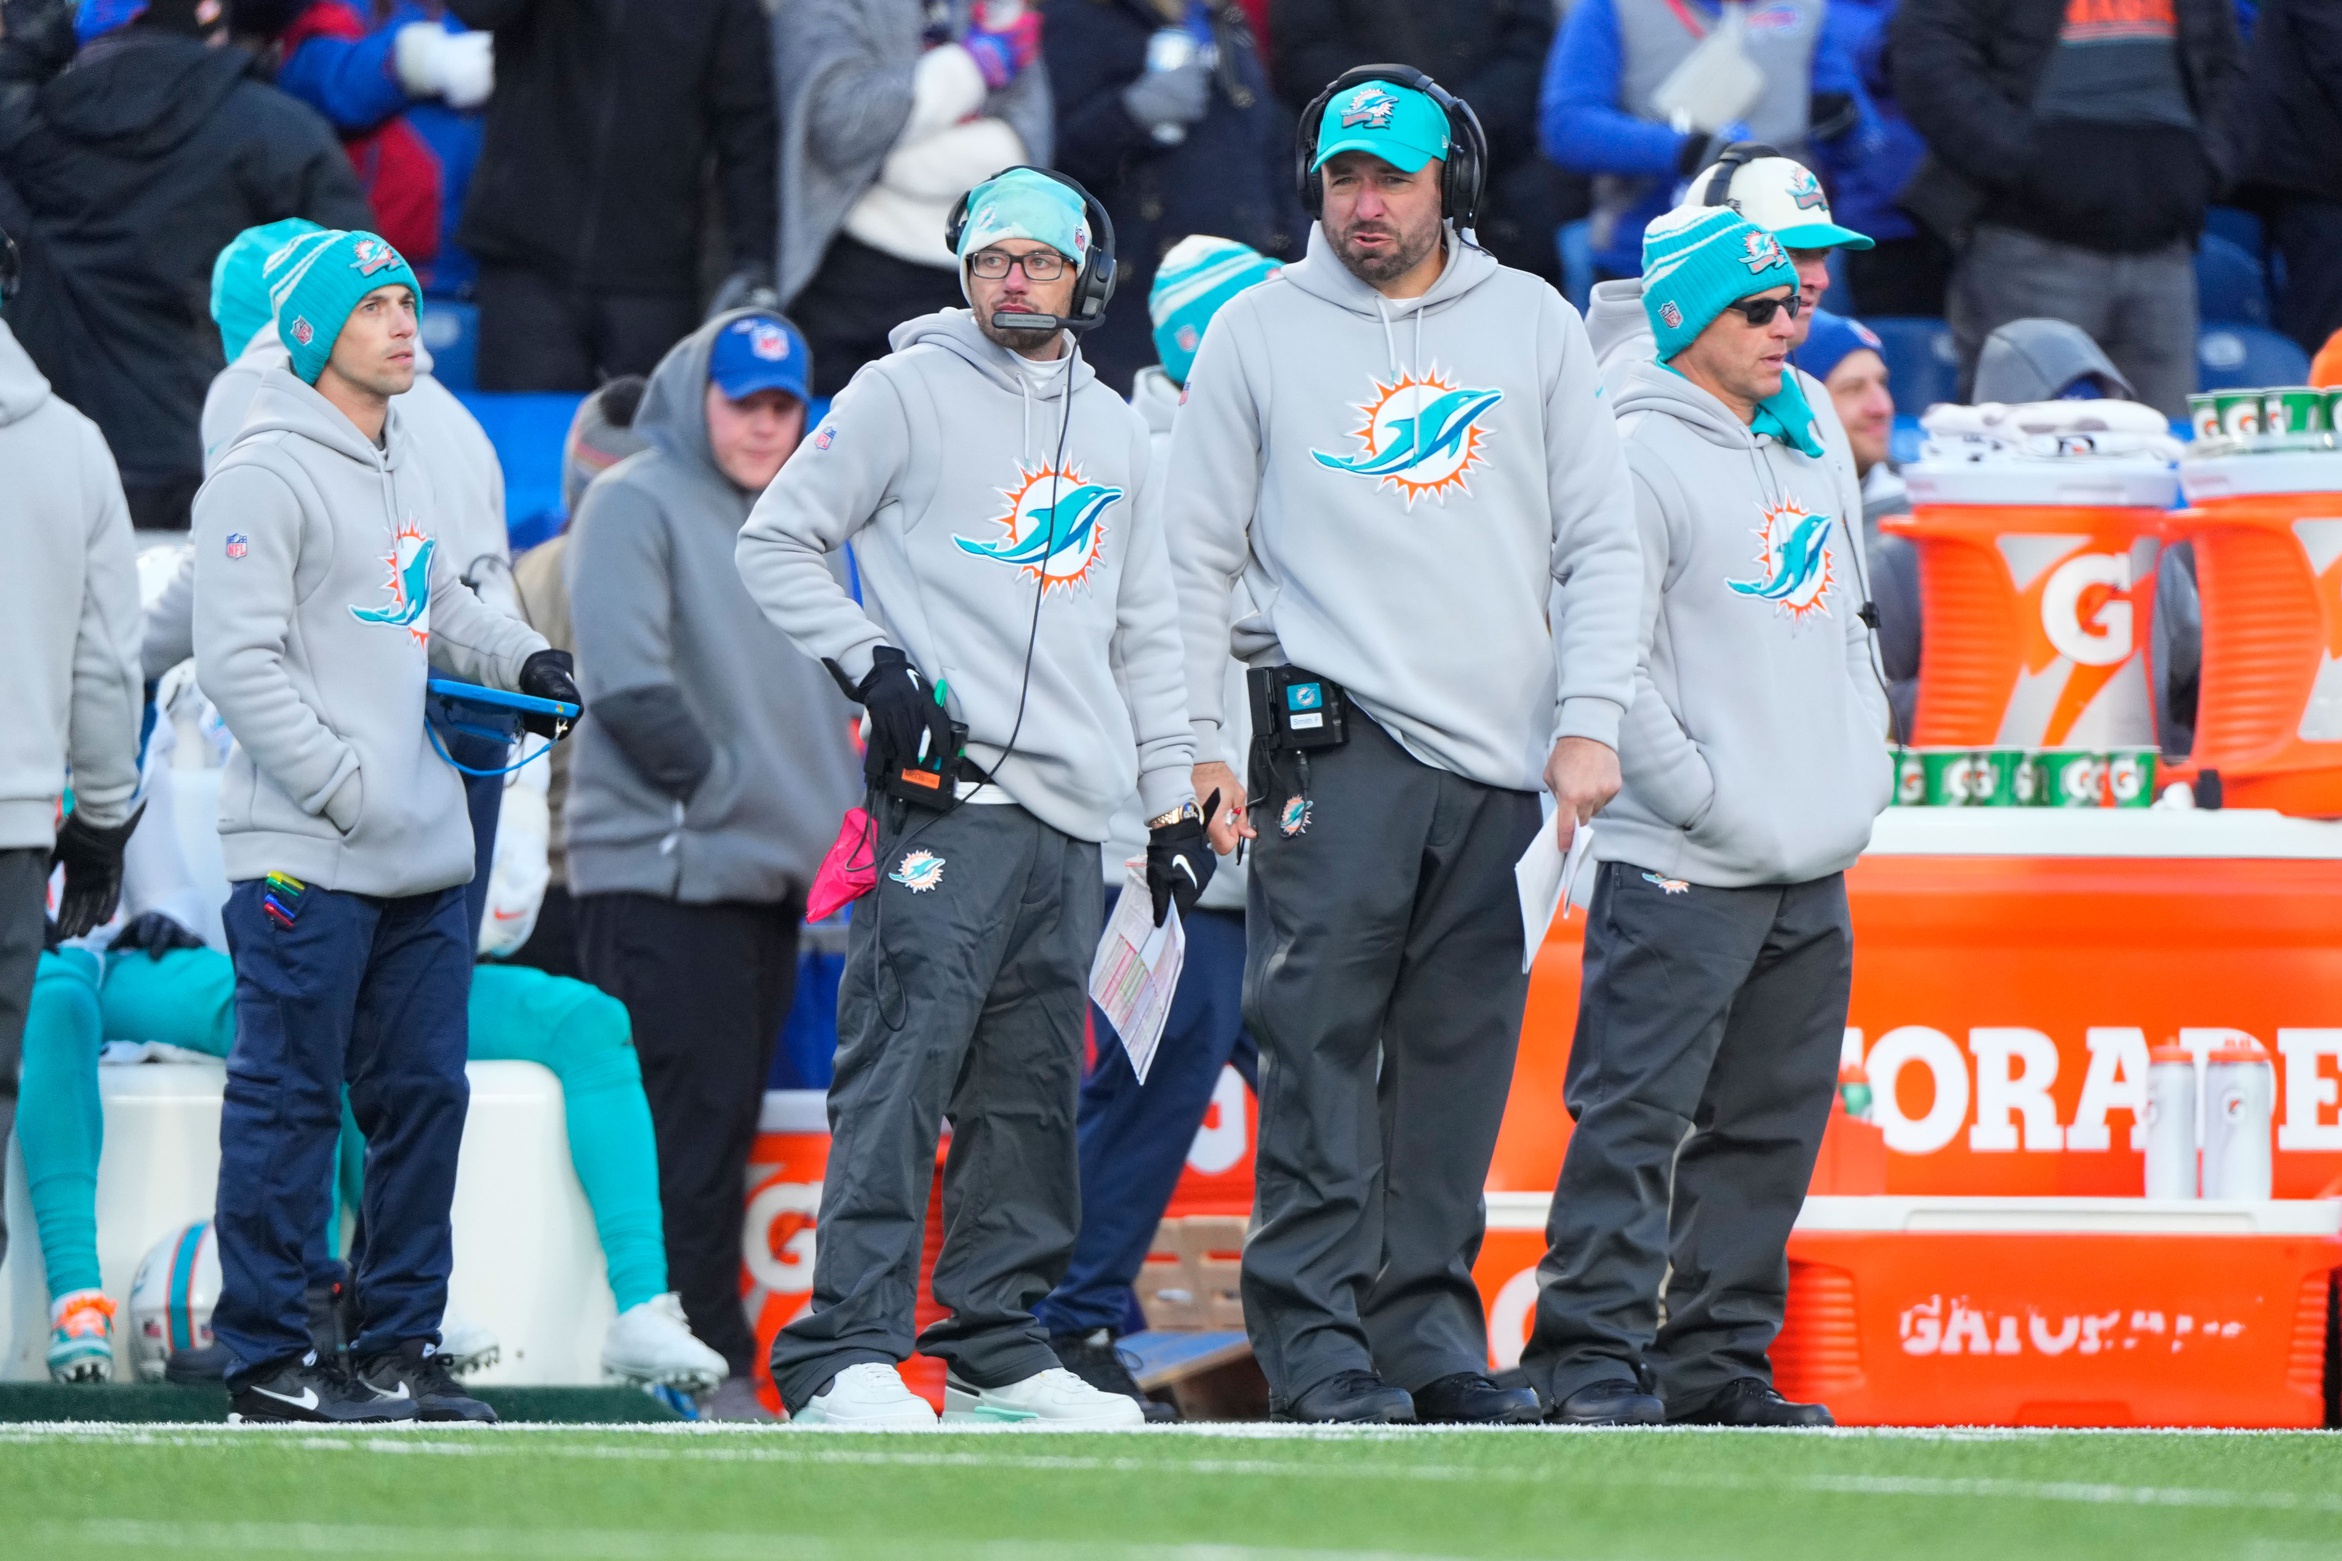 Dolphins offensive coordinator Frank Smith has worked under coach Mike McDaniel, developing the most explosive offense in the NFL.